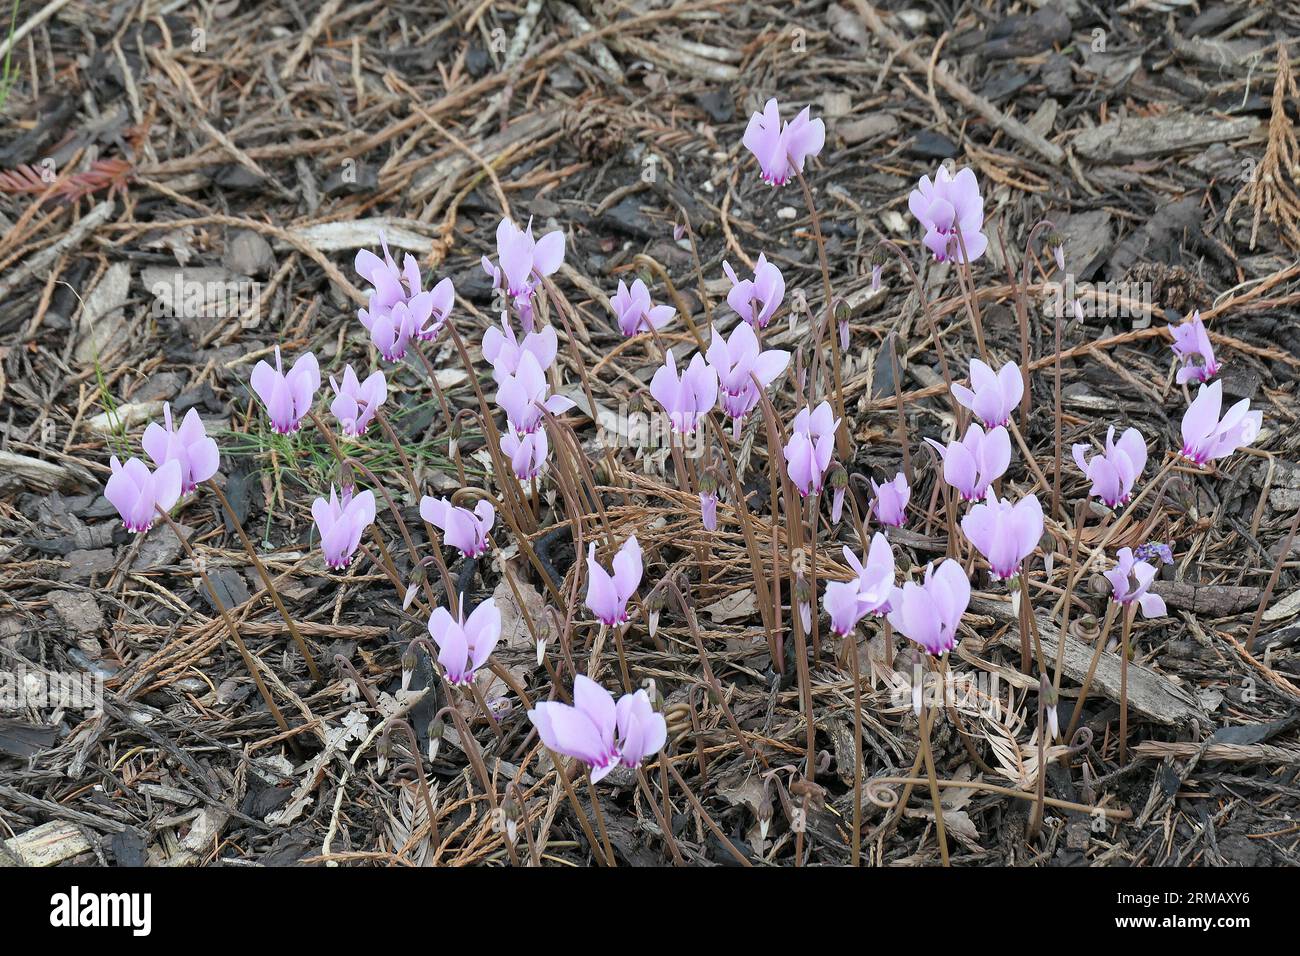 Closeup of the pink flowers without leaves of the late summer and autumn flowering tuberous garden plant Cyclamen hederifolium or ivy leaved cyclamen. Stock Photo